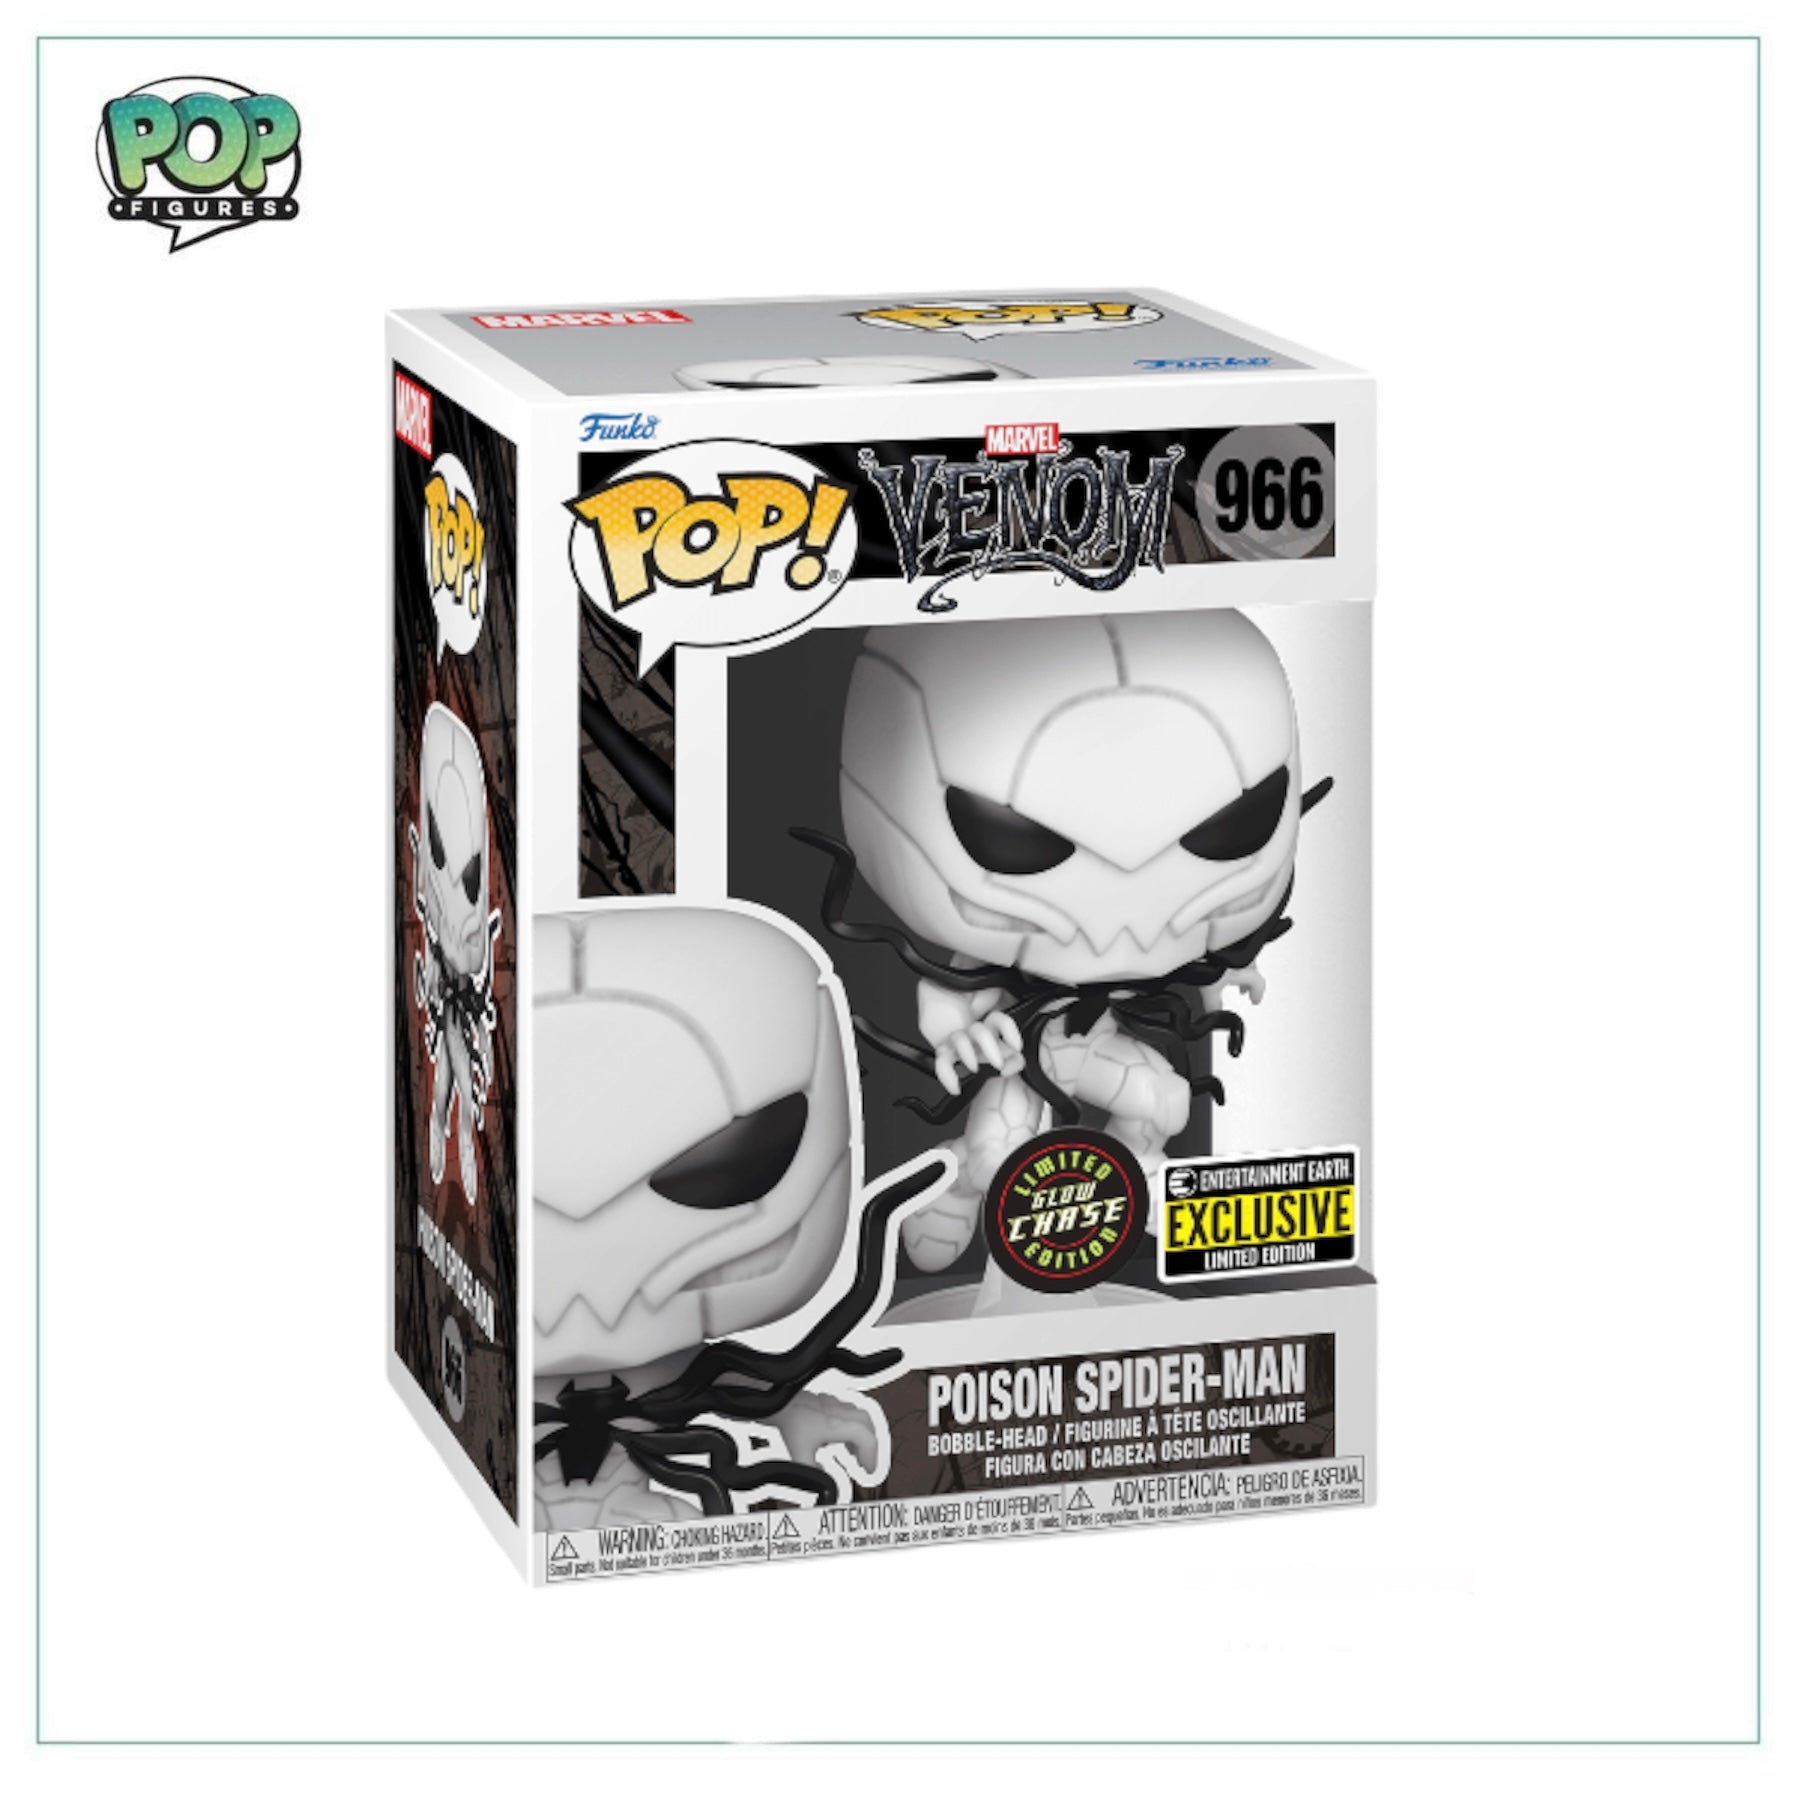 Poison Spider-Man #966 Funko Pop! Marvel - Entertainment Earth Exclusive - Chance Of Glow Chase